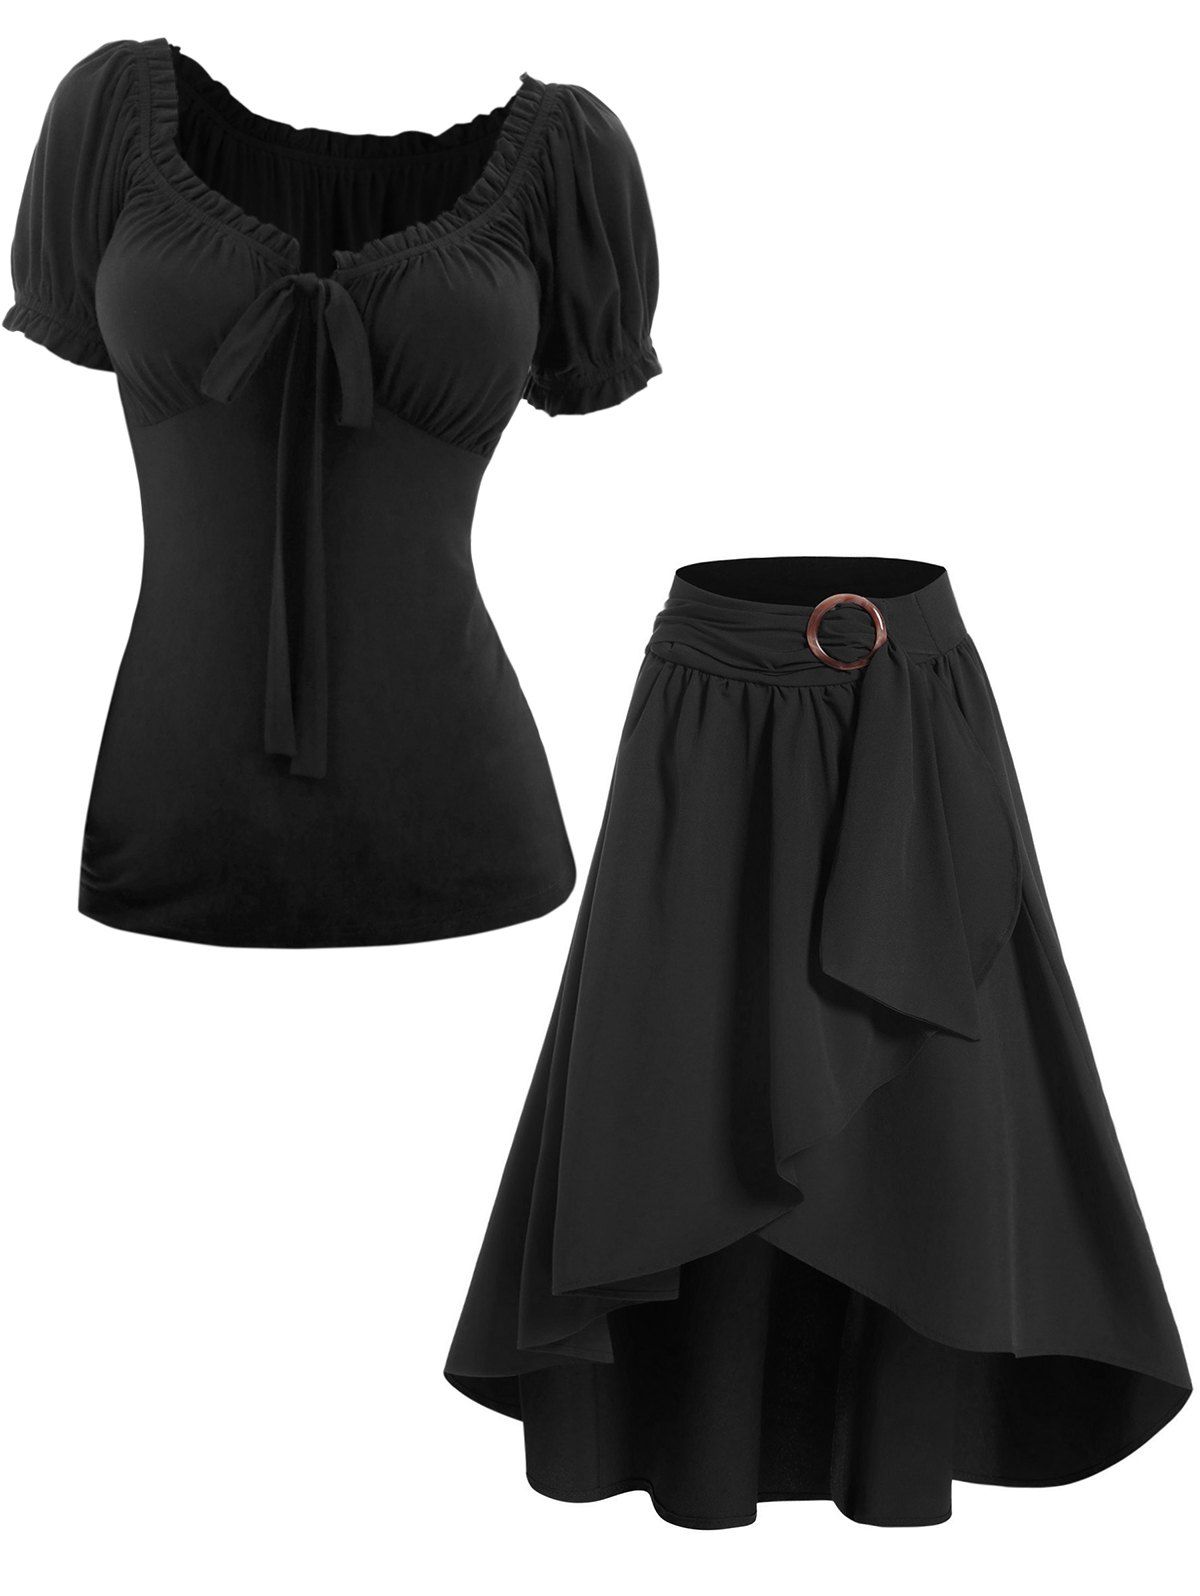 Solid Color Ruffles Bowknot Empire Waist Short Sleeve T-shirt And Overlay Self Belted Asymmetrical Hem Midi Skirt Outfit - BLACK S